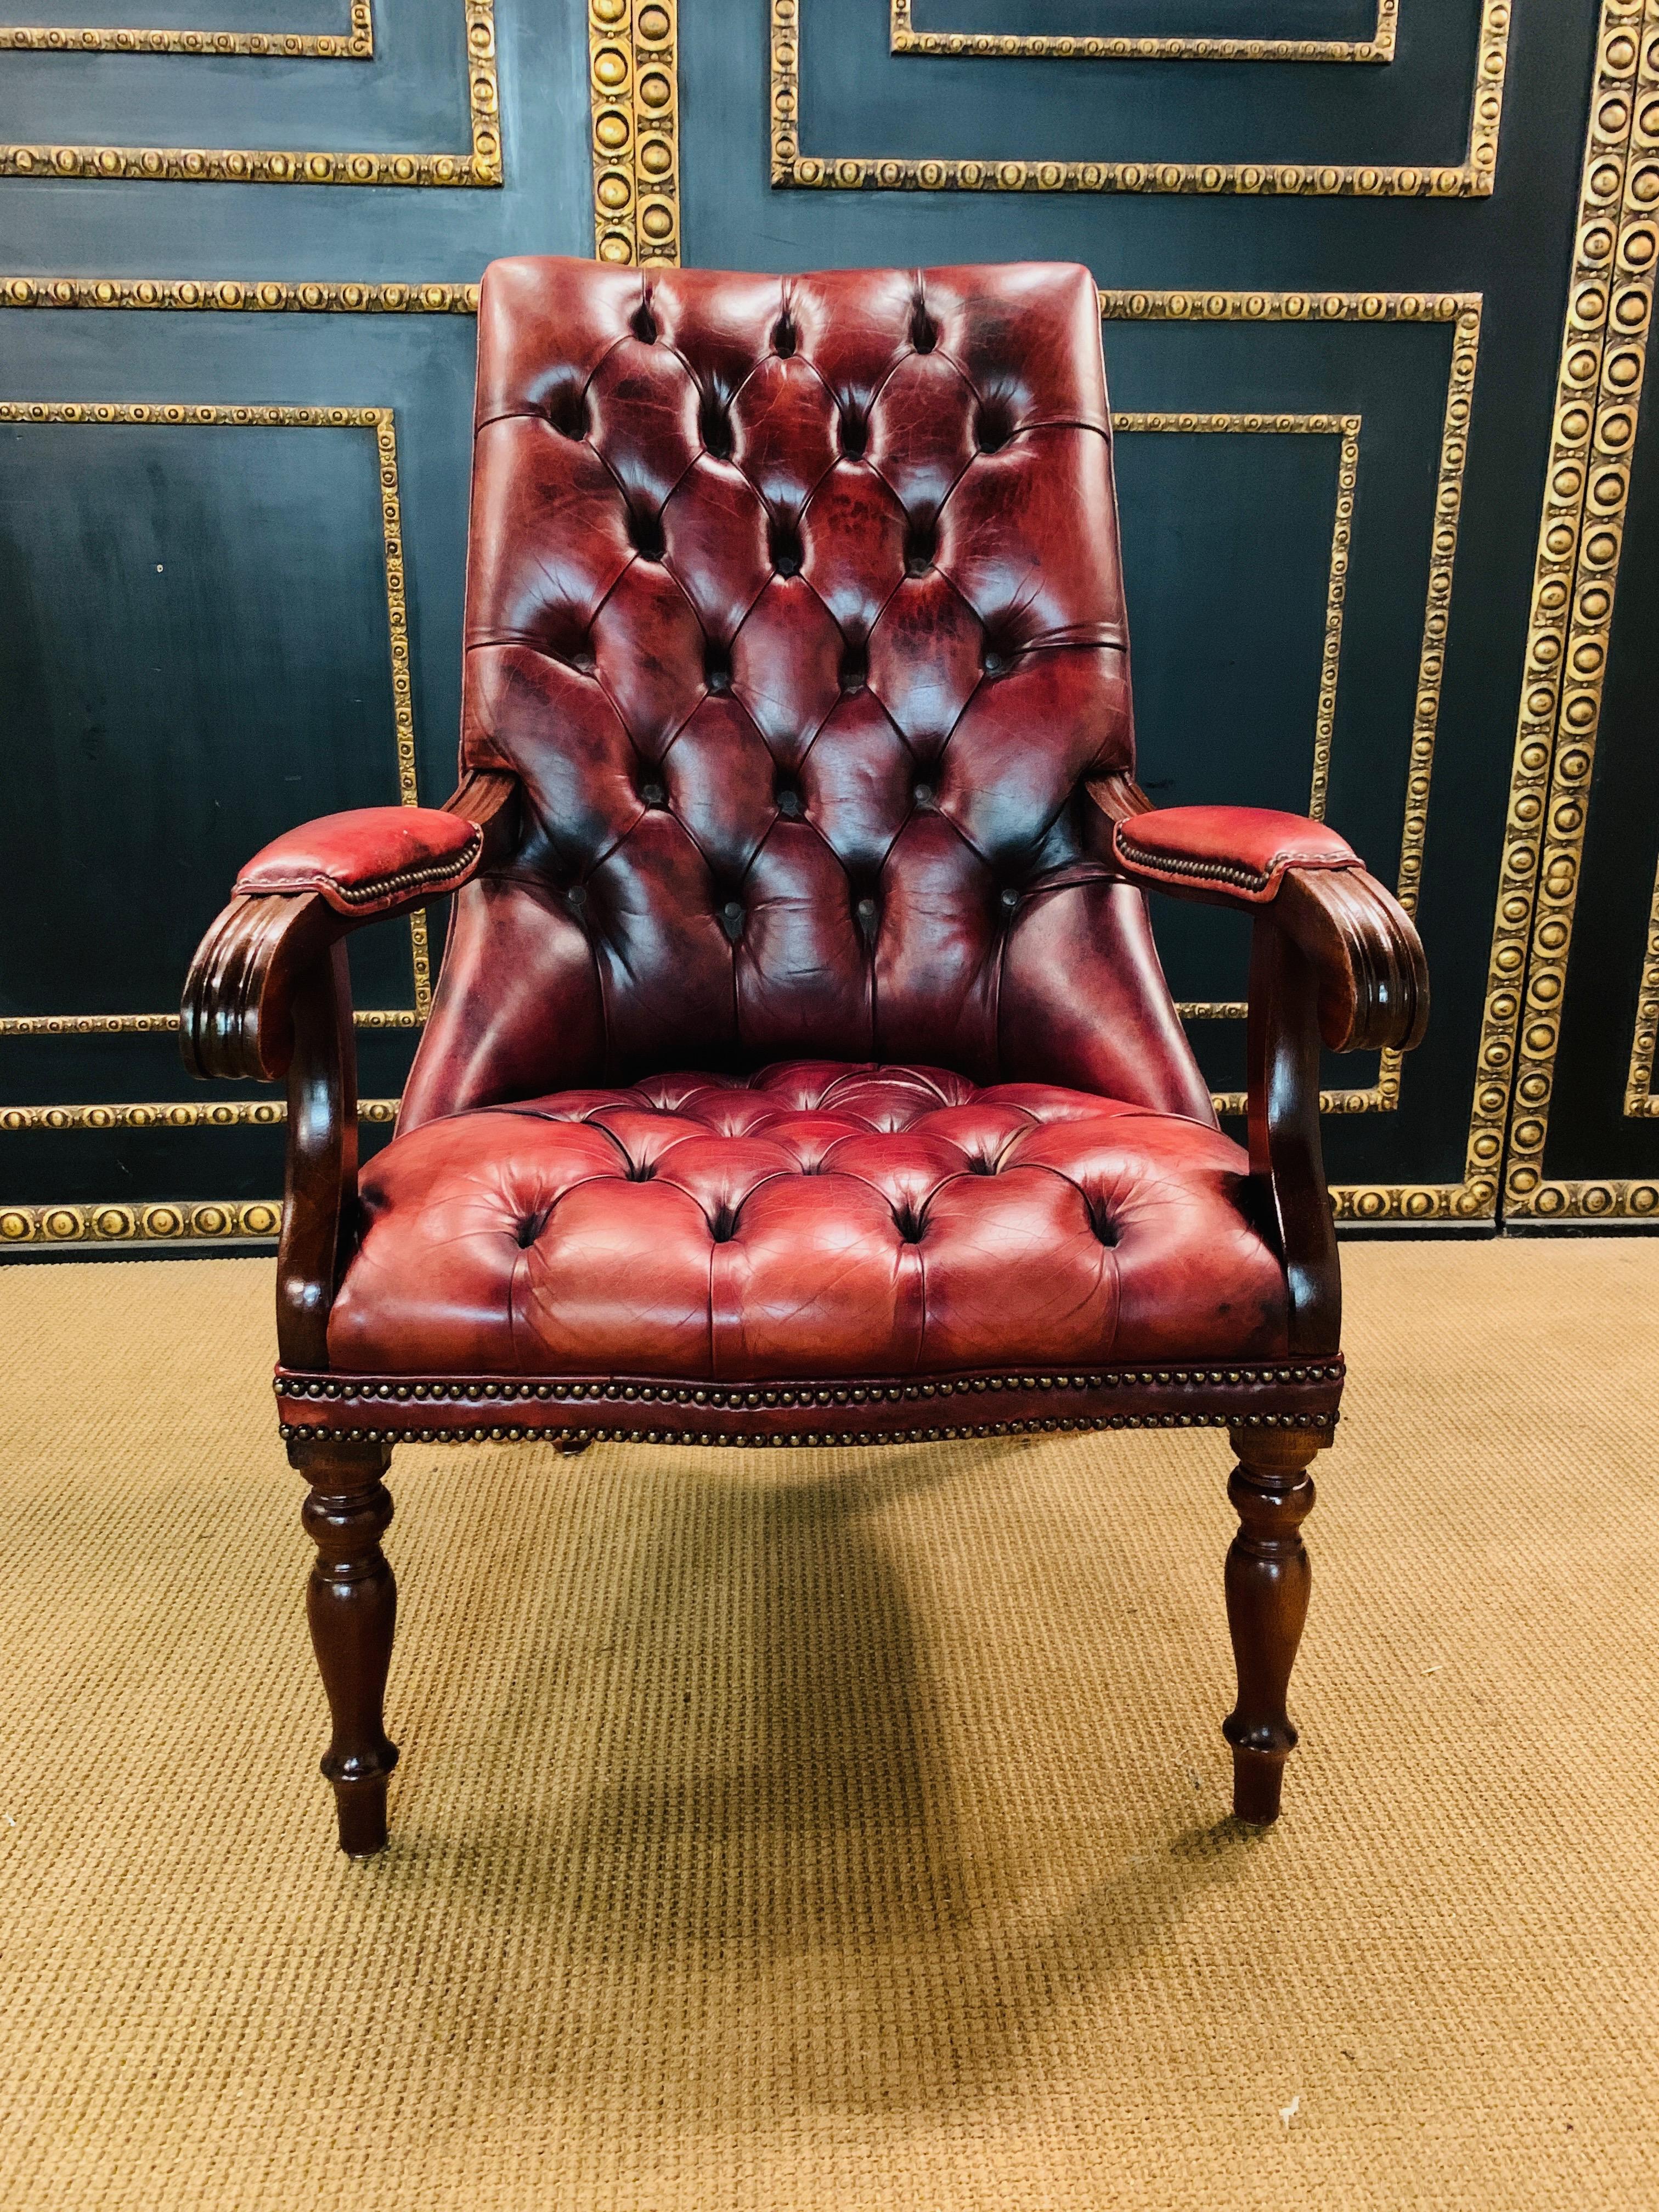 Classic English Chesterfield armchair, oxblood or Bordeaux leather complete upholstery in Chesterfield. Classic shape and extremely comfortable, 20th century. Solid mahogany wood.